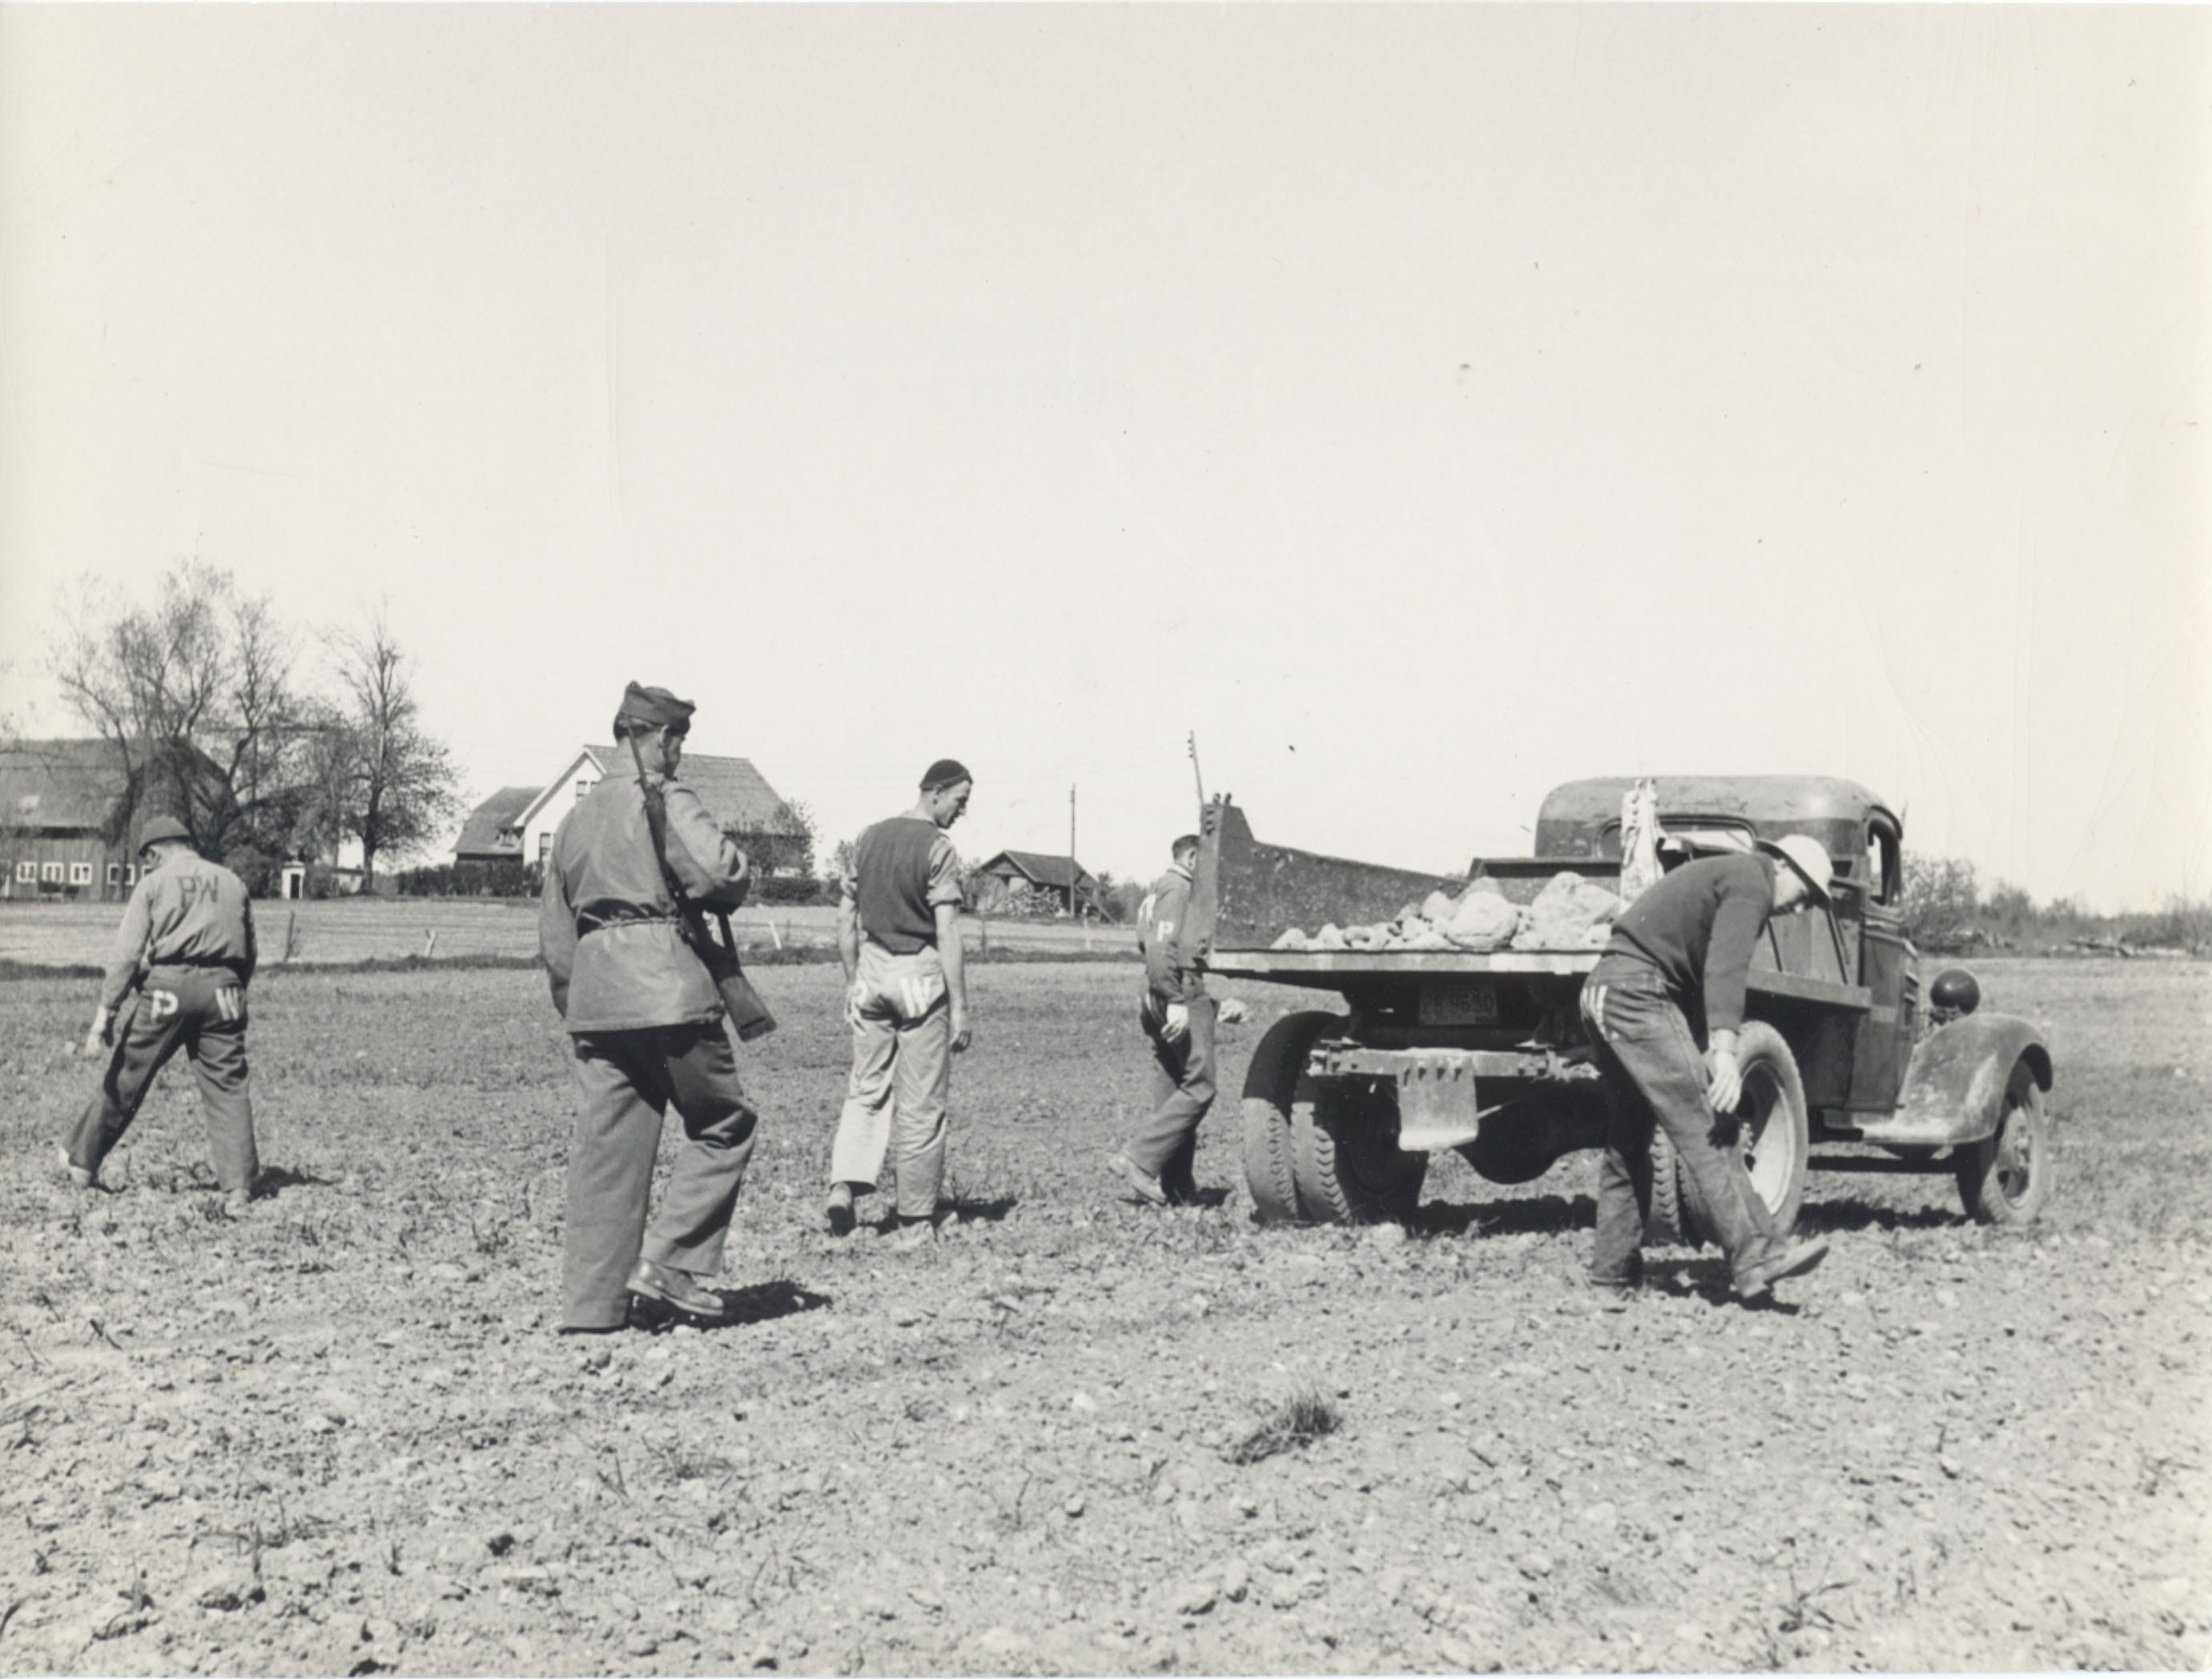 German POWs pick stones from a field in Door County, accompanied by a guard during World War II.